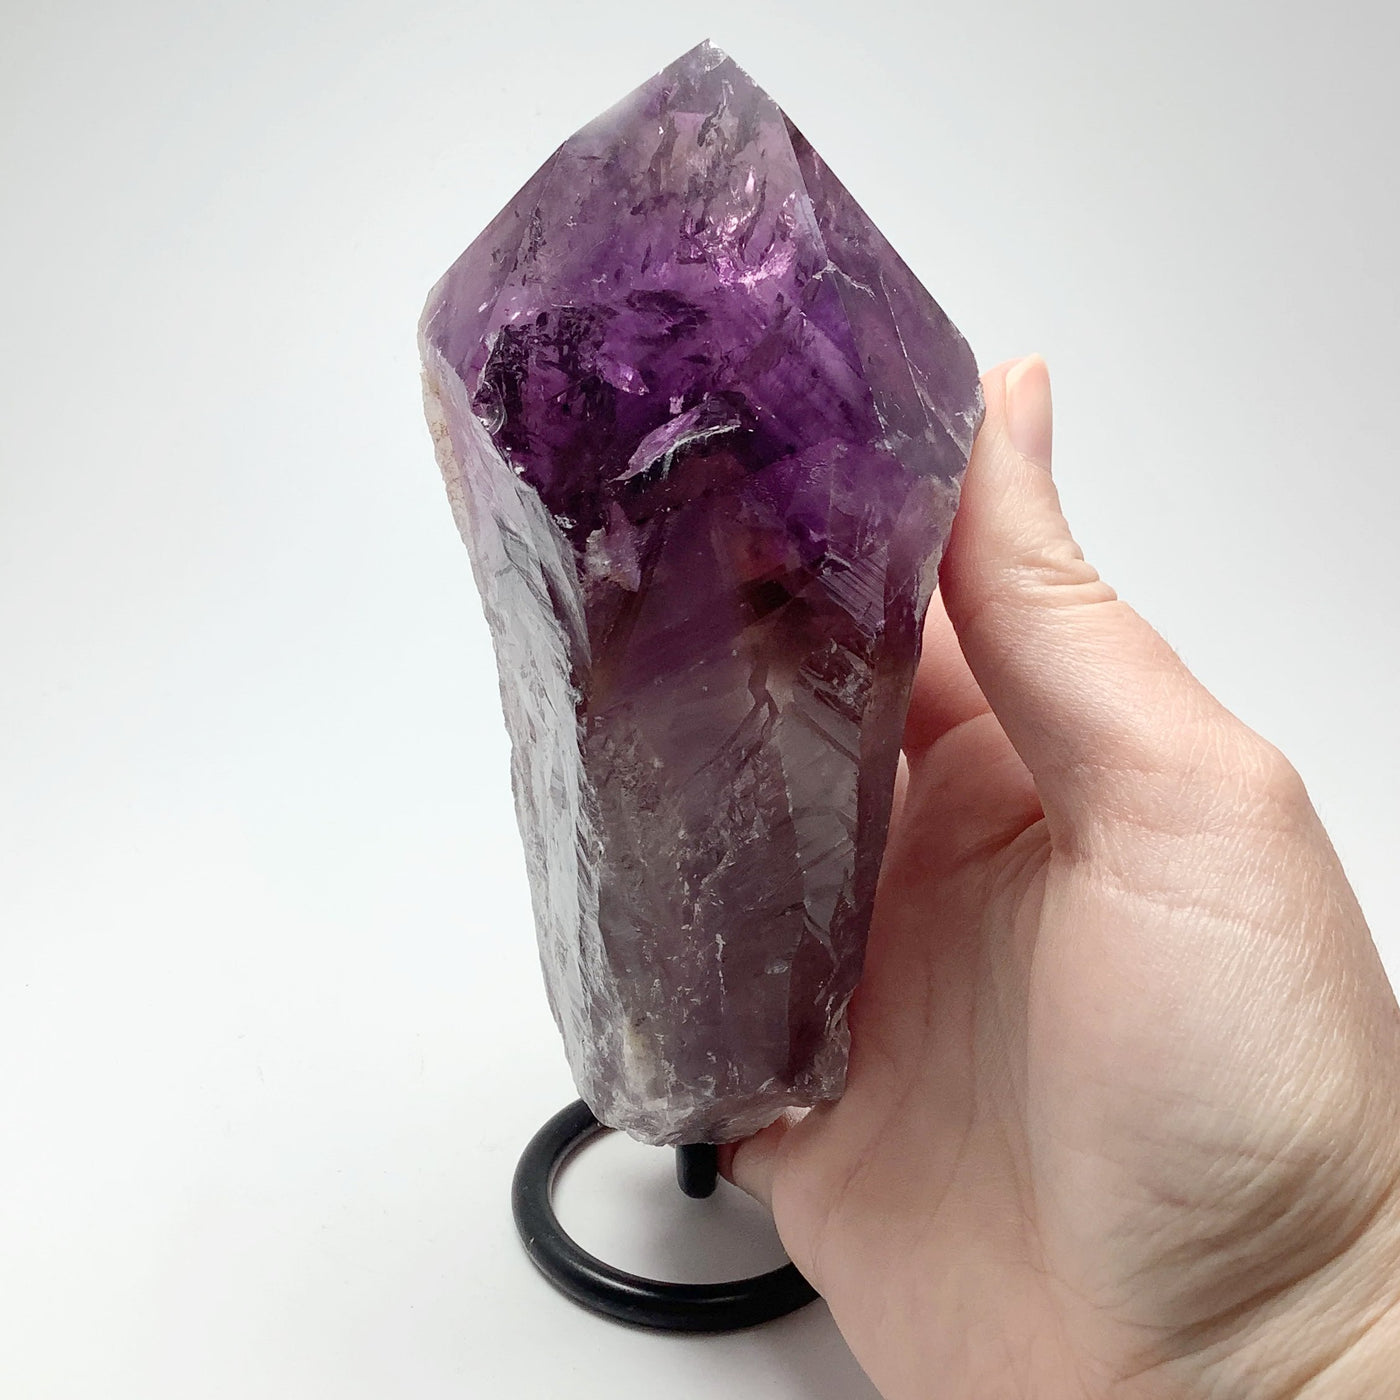 Rough Amethyst Scepter On Display Stand